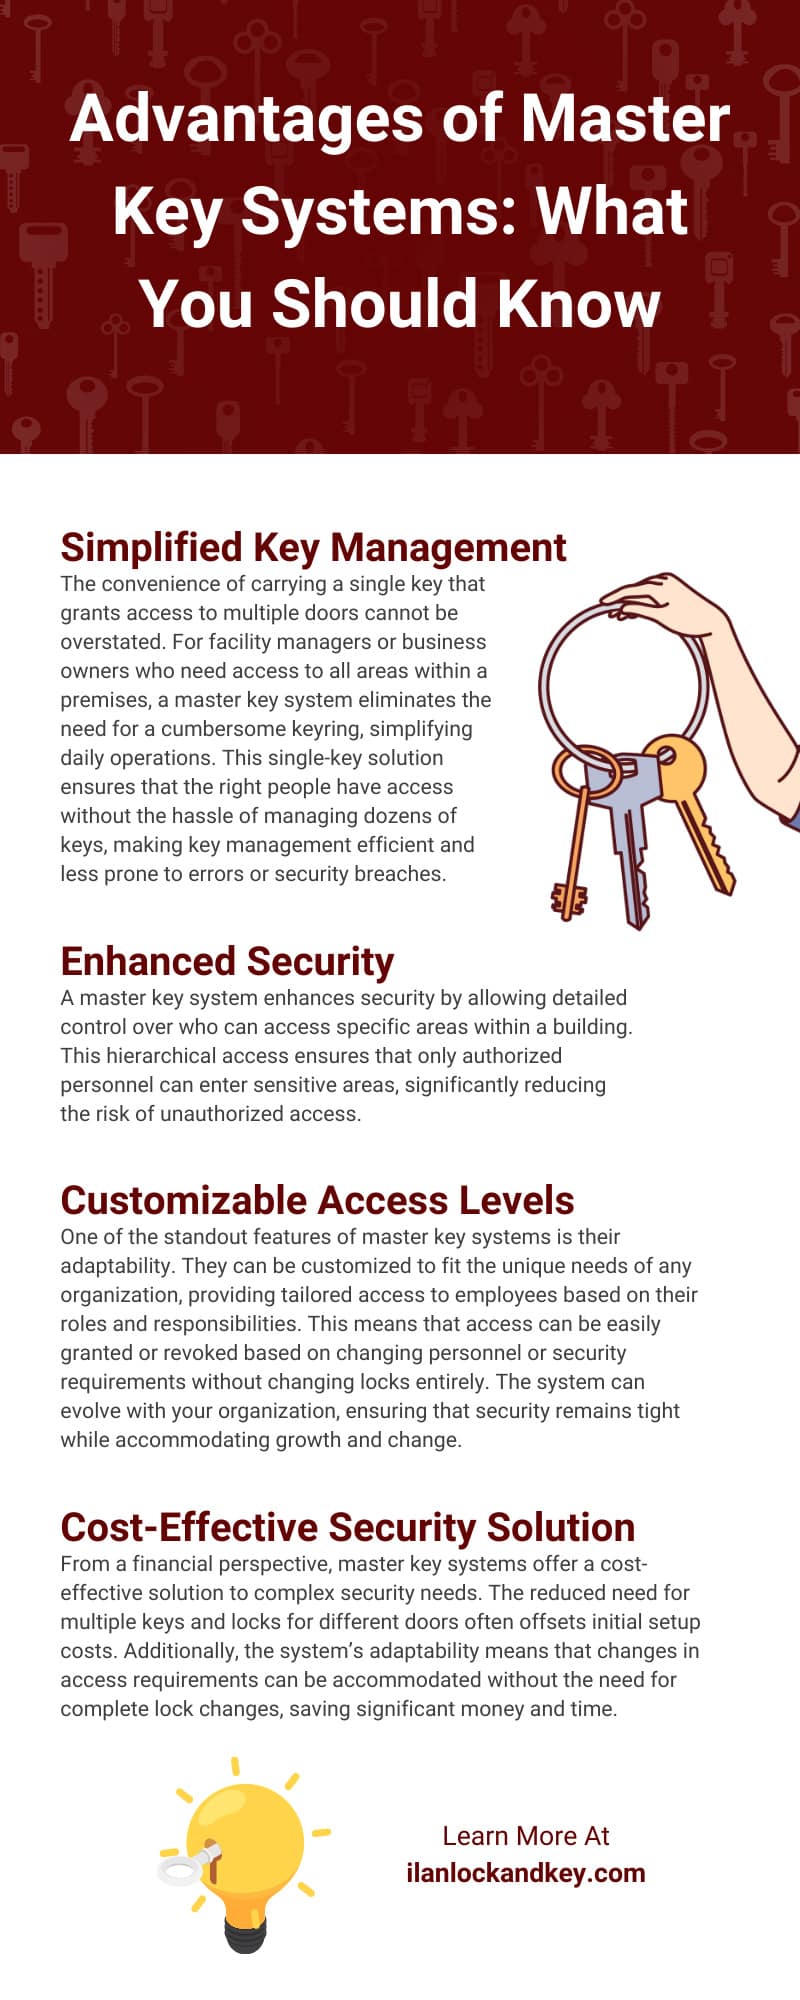 Advantages of Master Key Systems: What You Should Know